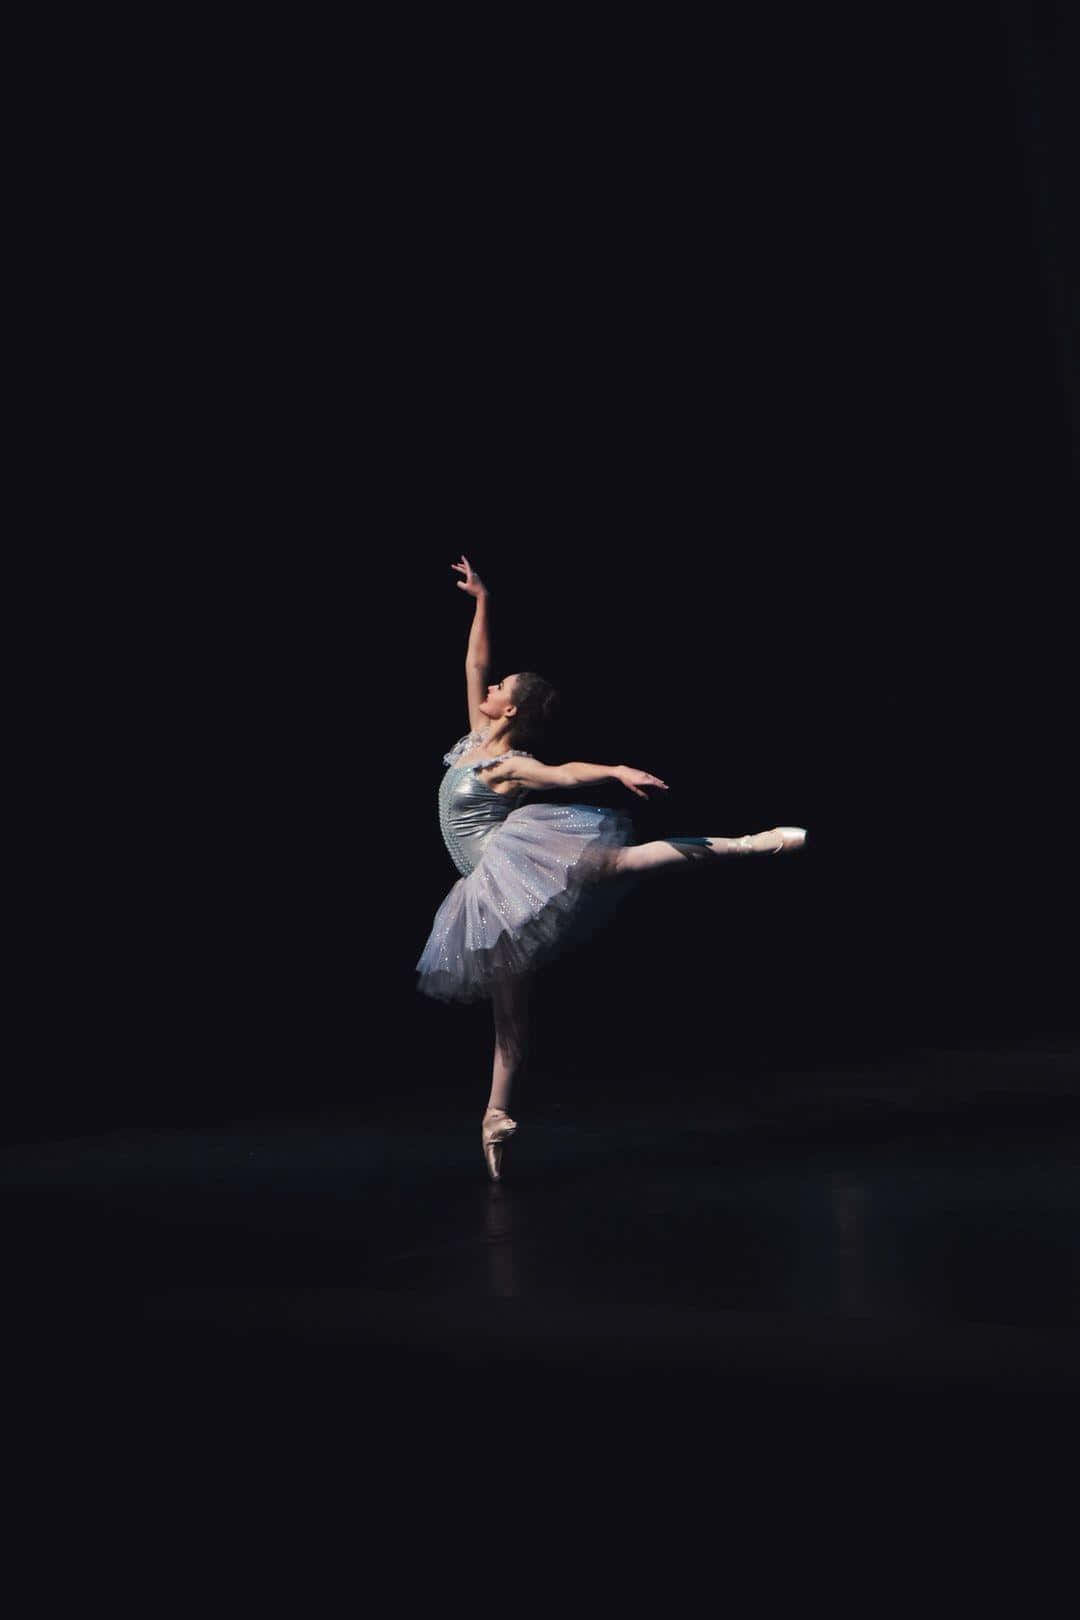 A Young Ballerina In A Tutu On A Dark Stage